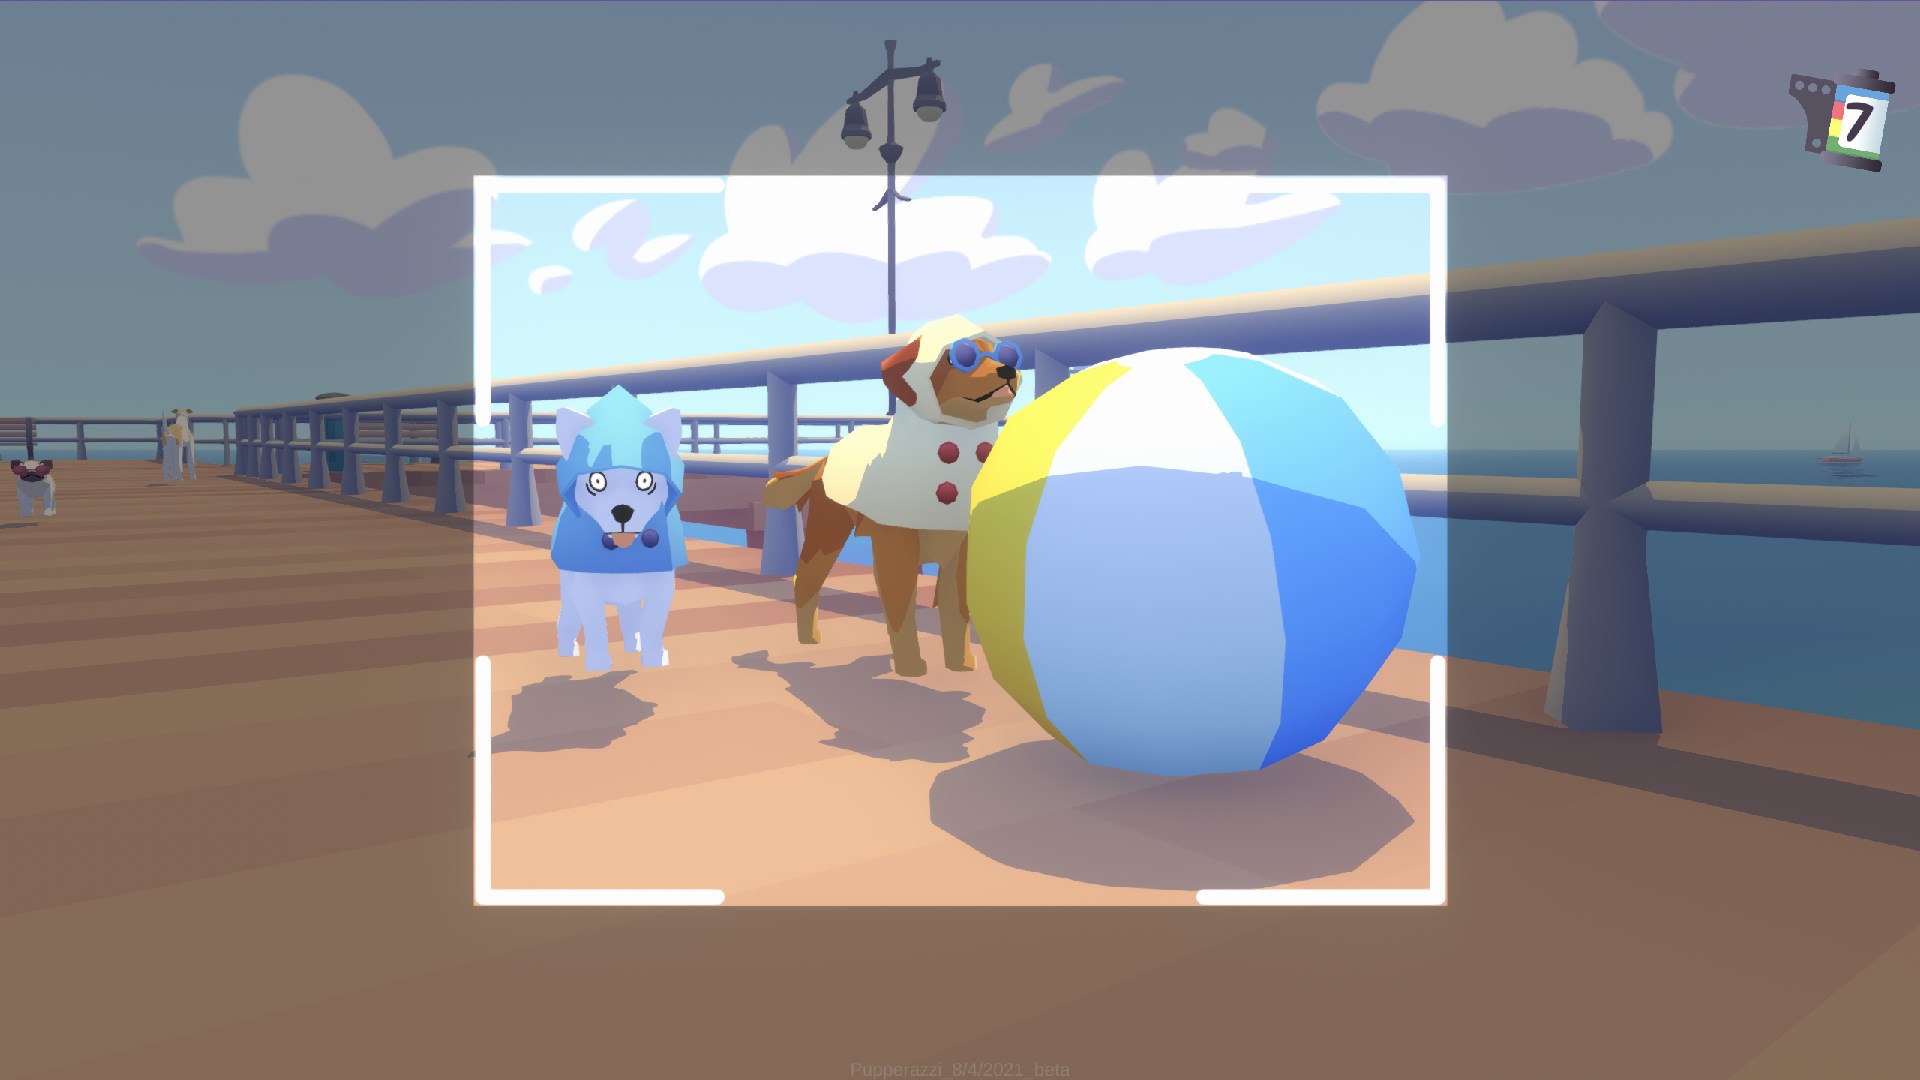 Pupperazzi Is Now Available For PC, Xbox One, And Xbox Series X|S
(Game Pass)